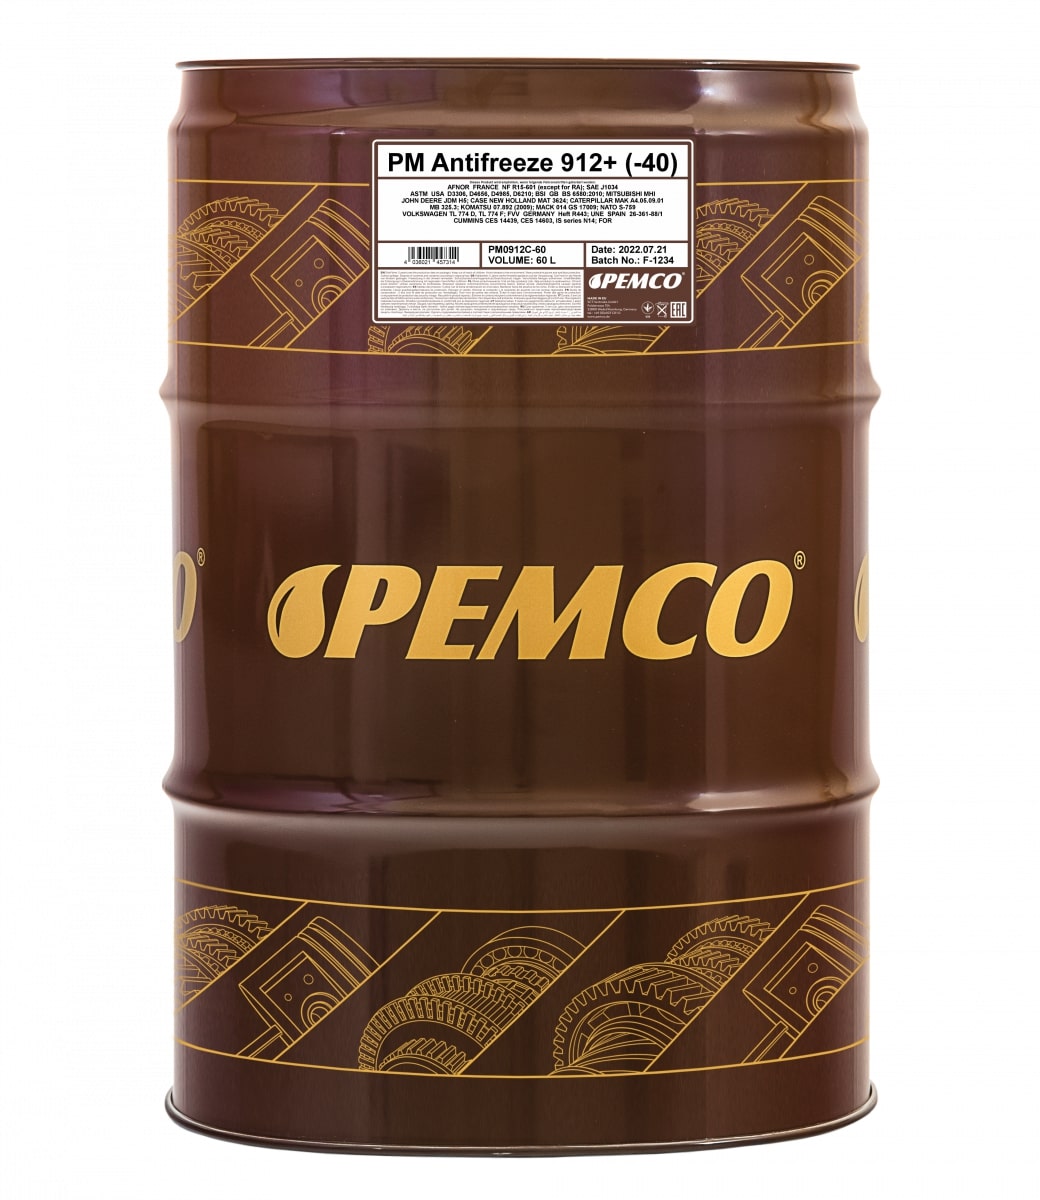 PEMCO Antifreeze 912+ (Concentrate)